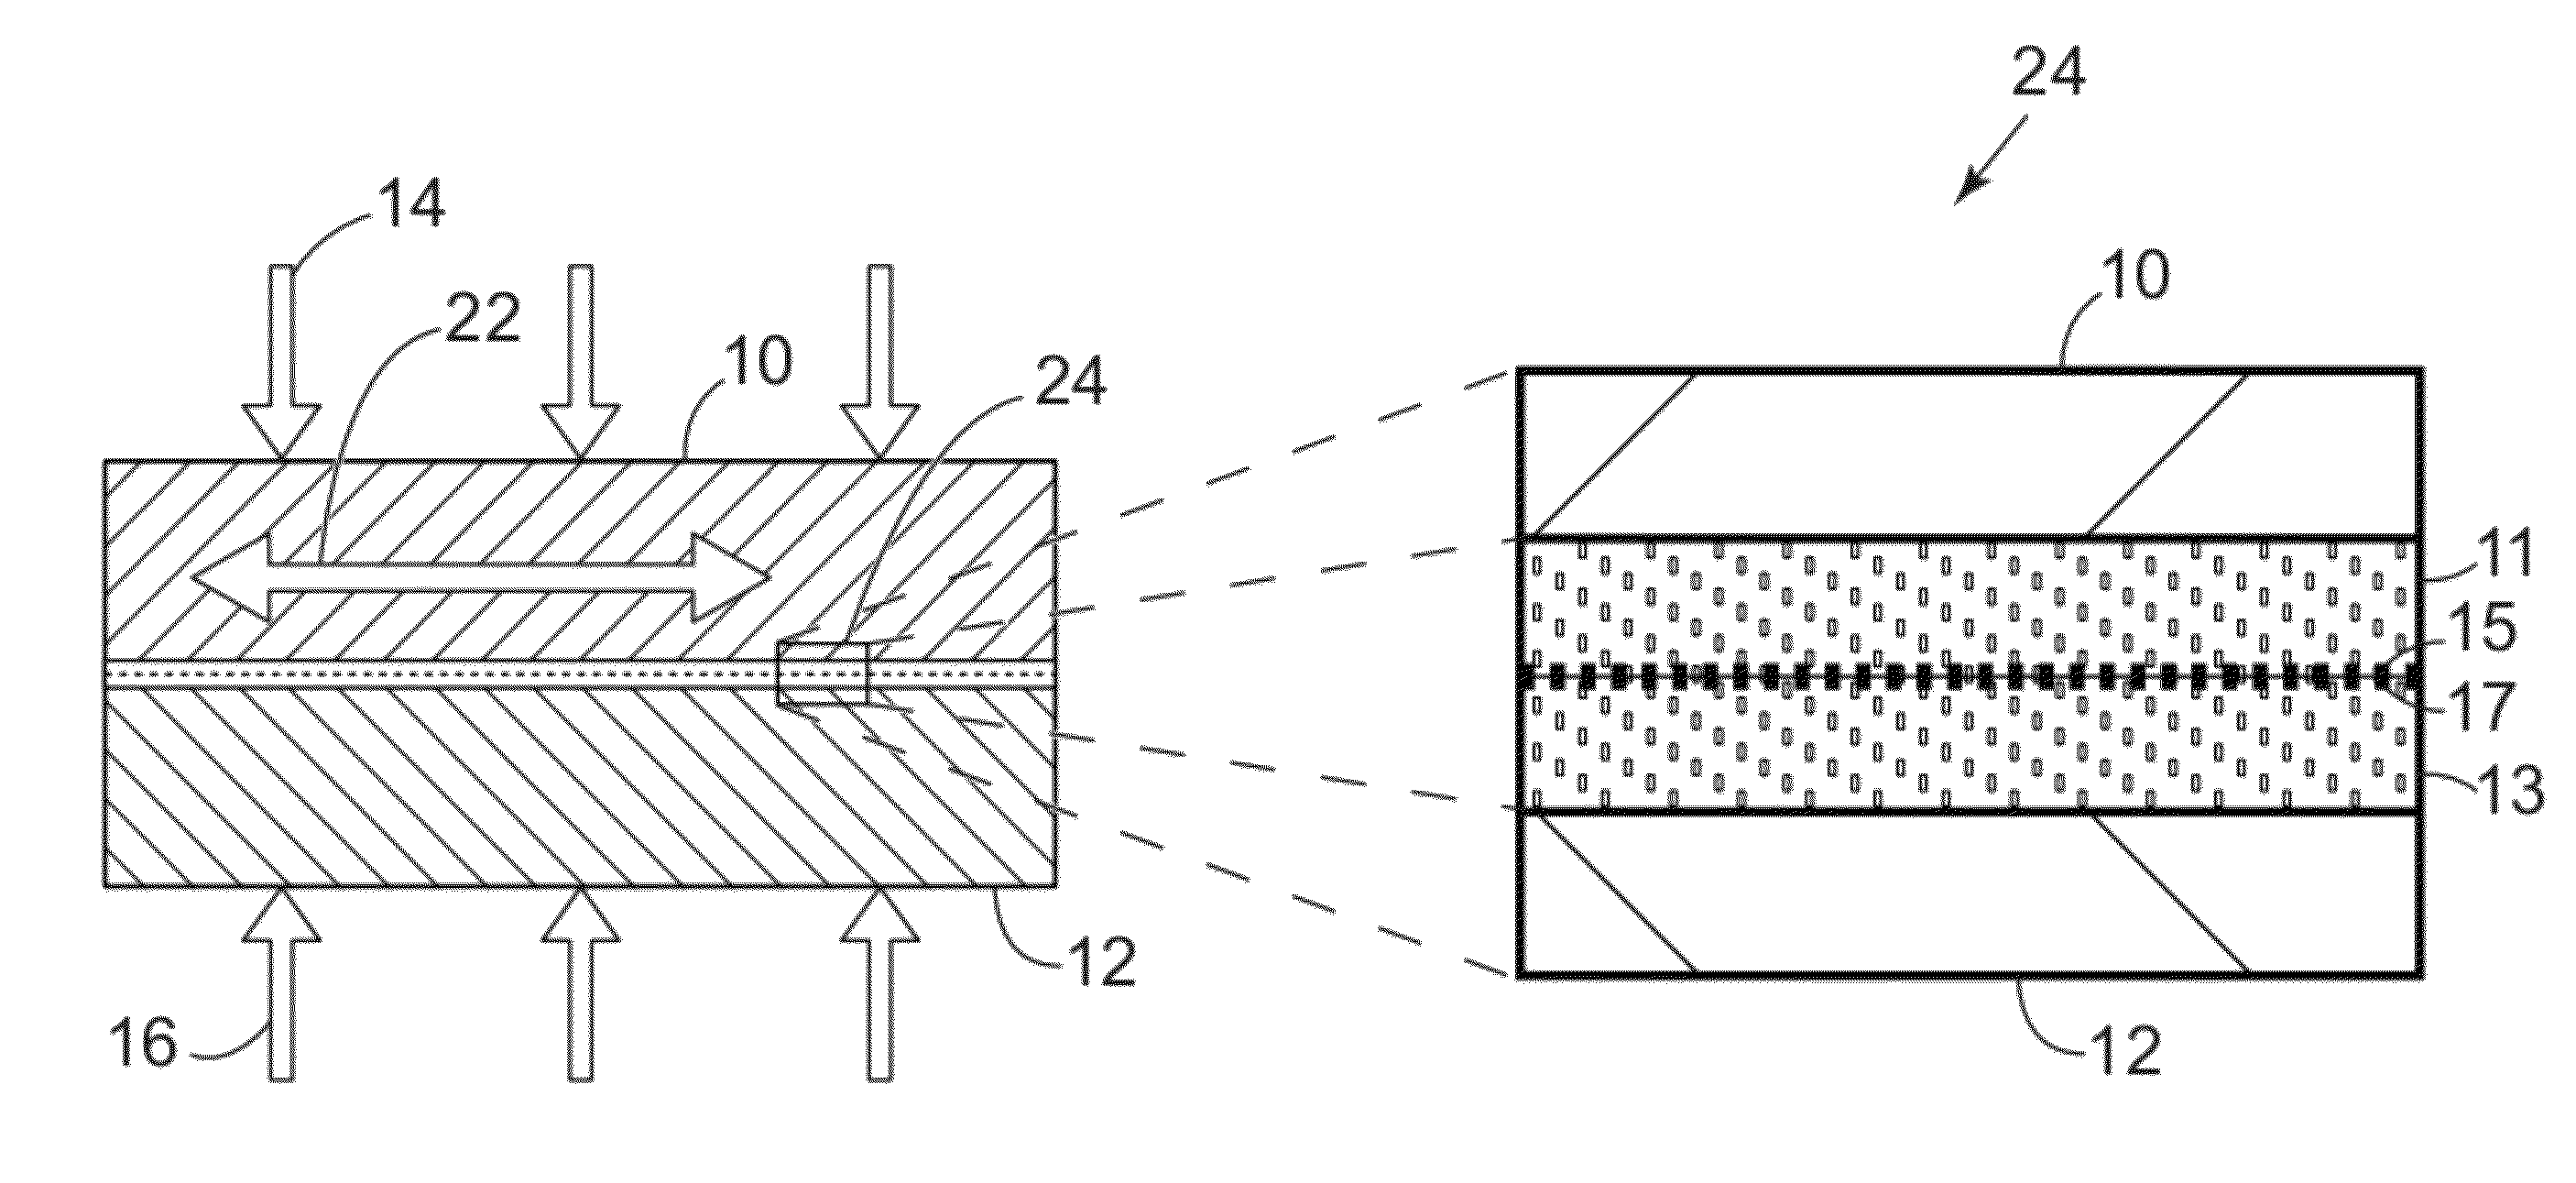 Composite biaxially textured substrates using ultrasonic consolidation